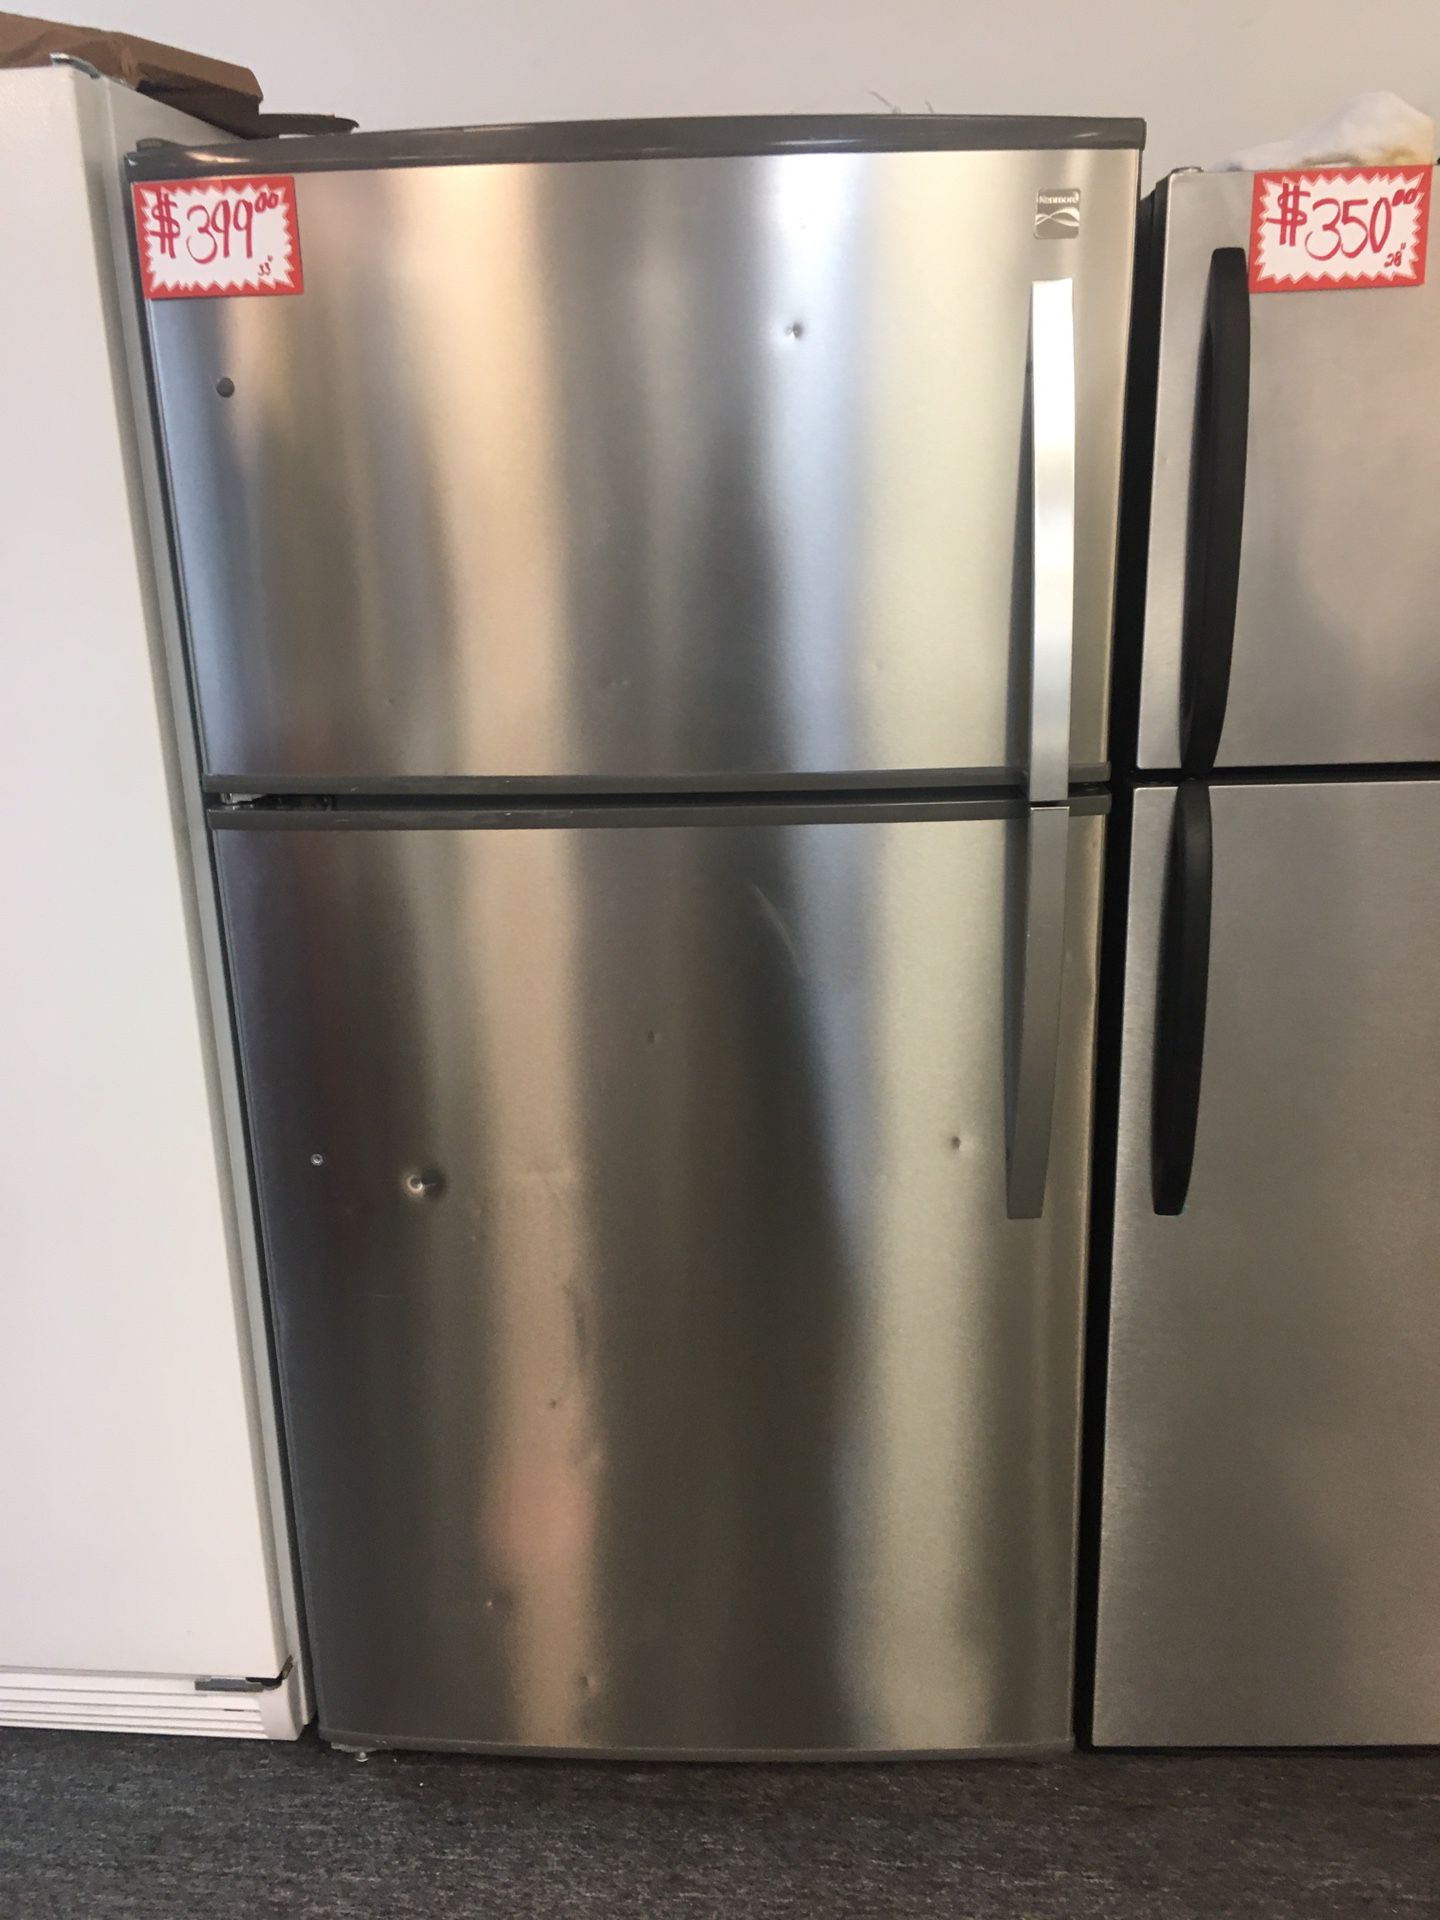 Kenmore 33” Top Freezer Refrigerator Stainless Steel Working Perfectly 4 Months Warranty